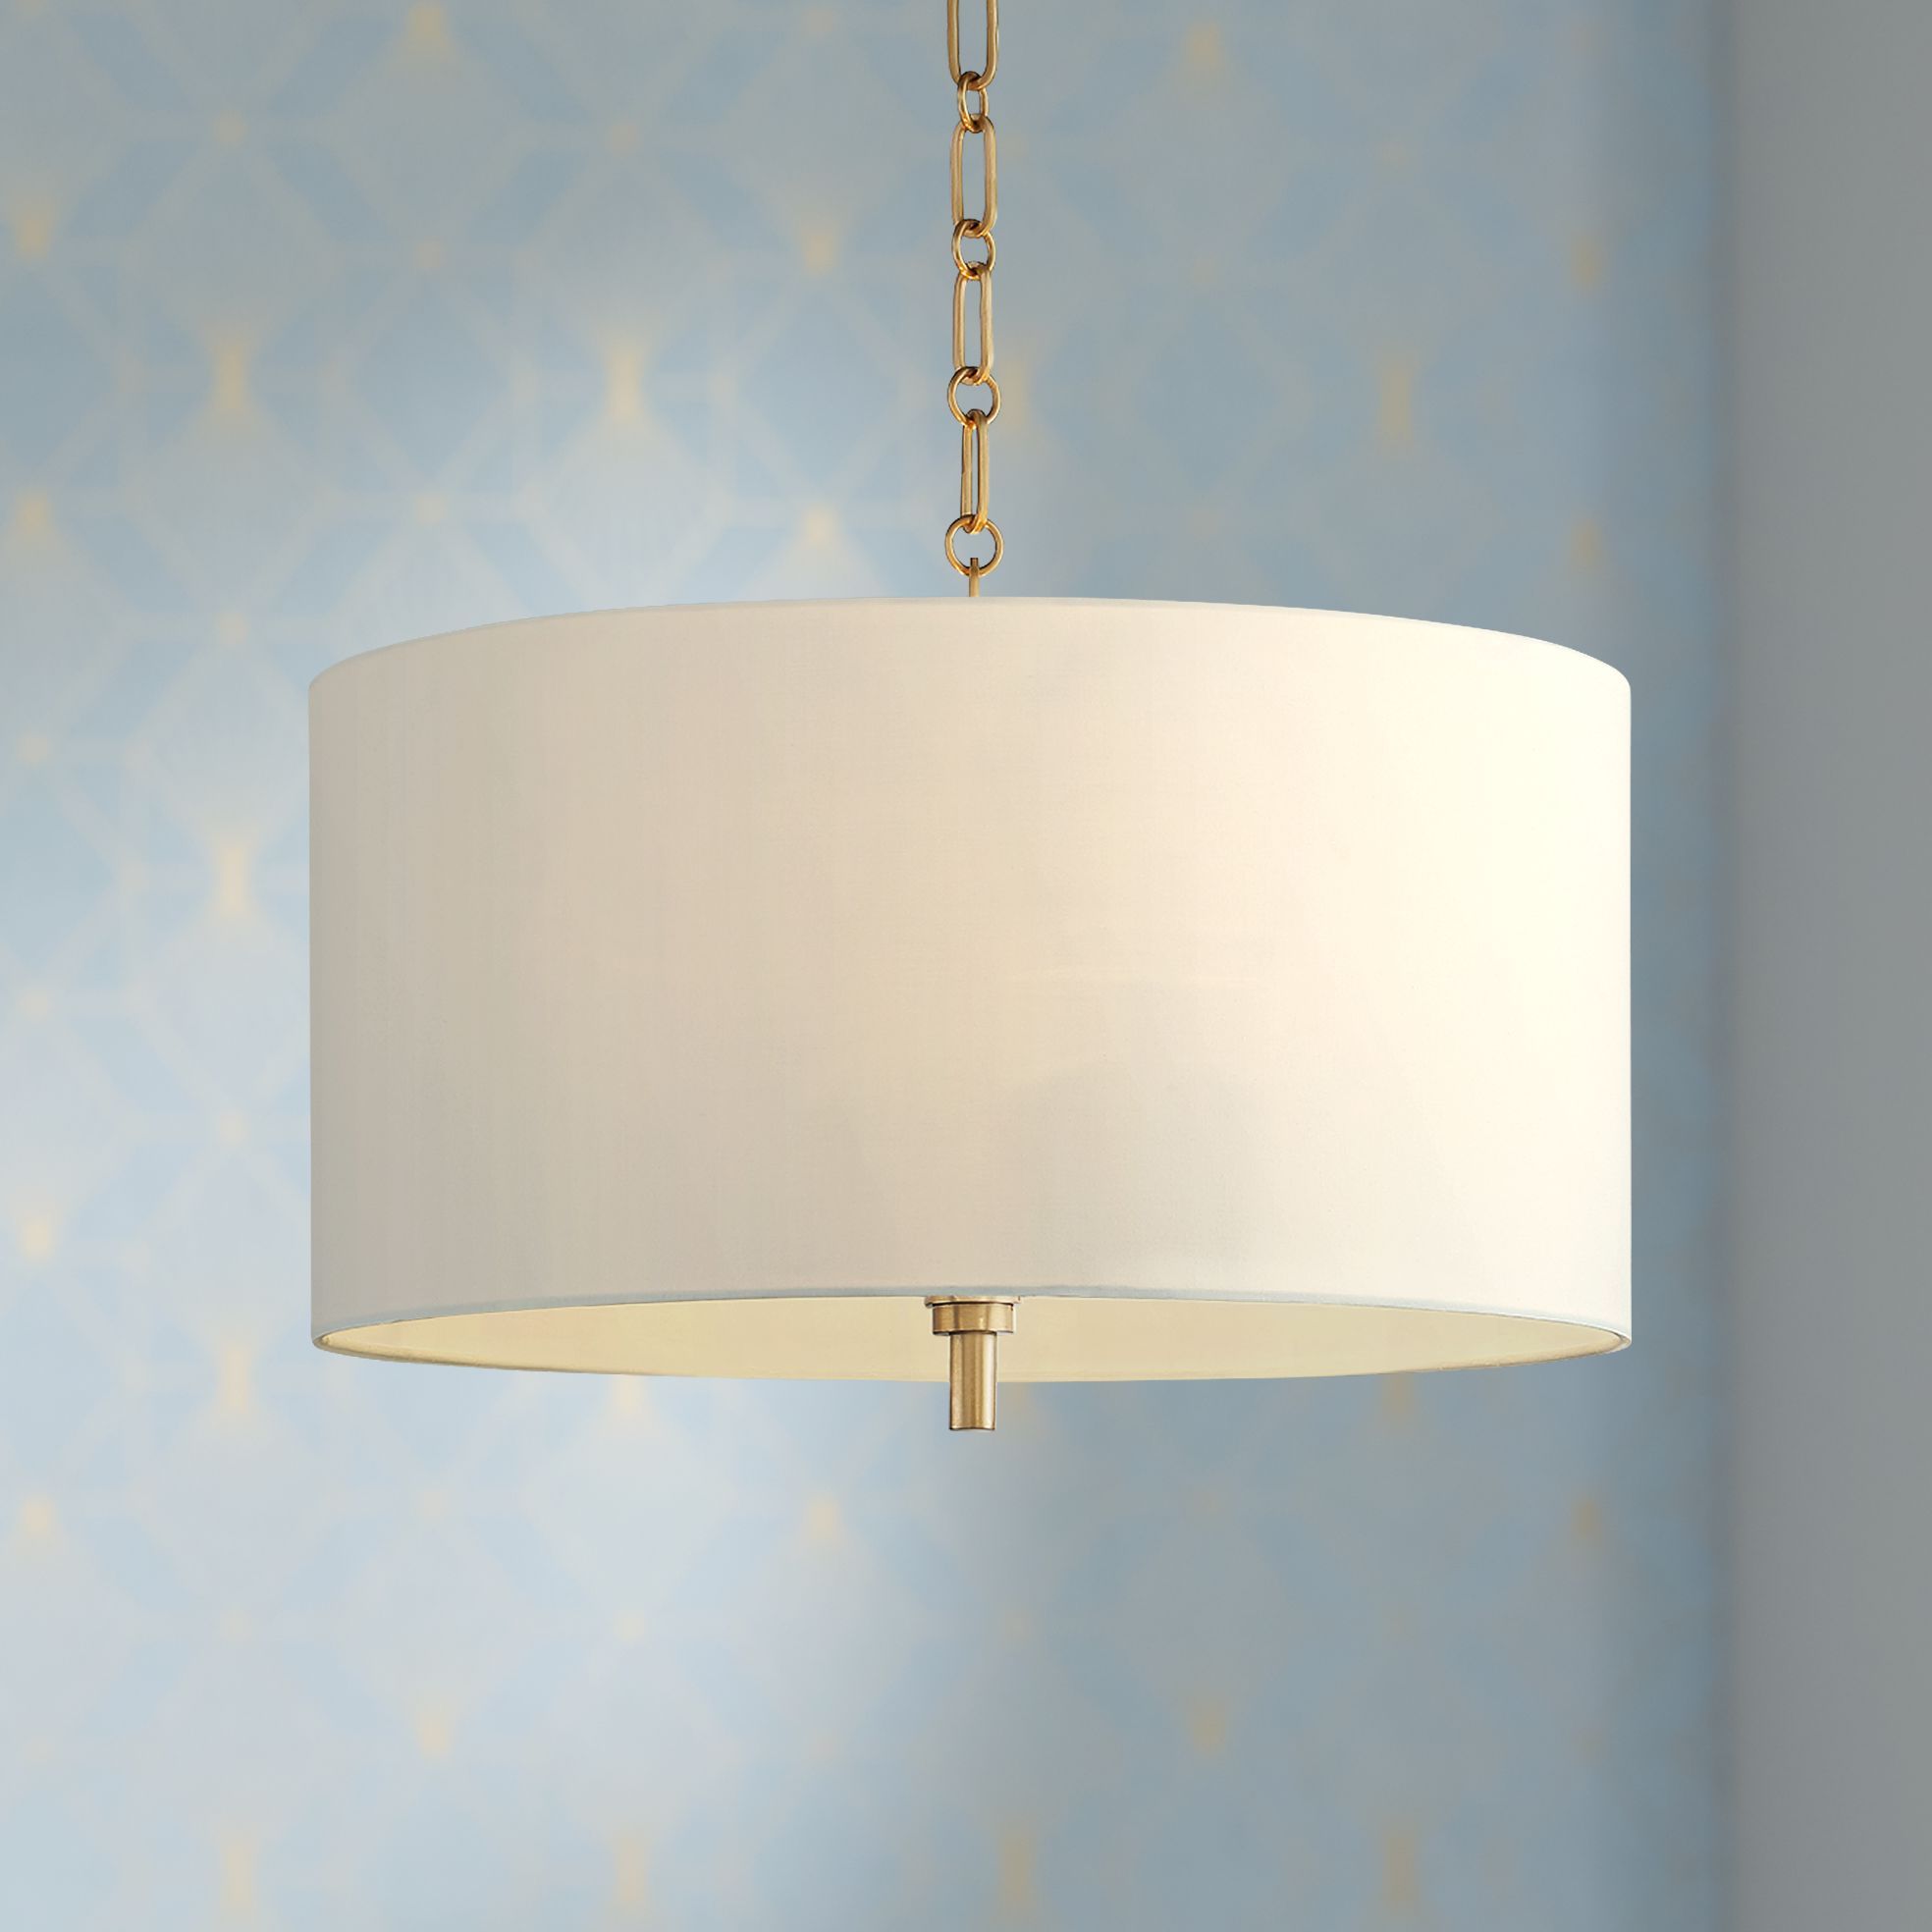 Fashionable Barnes And Ivy Warm Gold Drum Pendant Chandelier 20" Wide For Oatmeal Linen Shade Chandeliers (View 5 of 20)